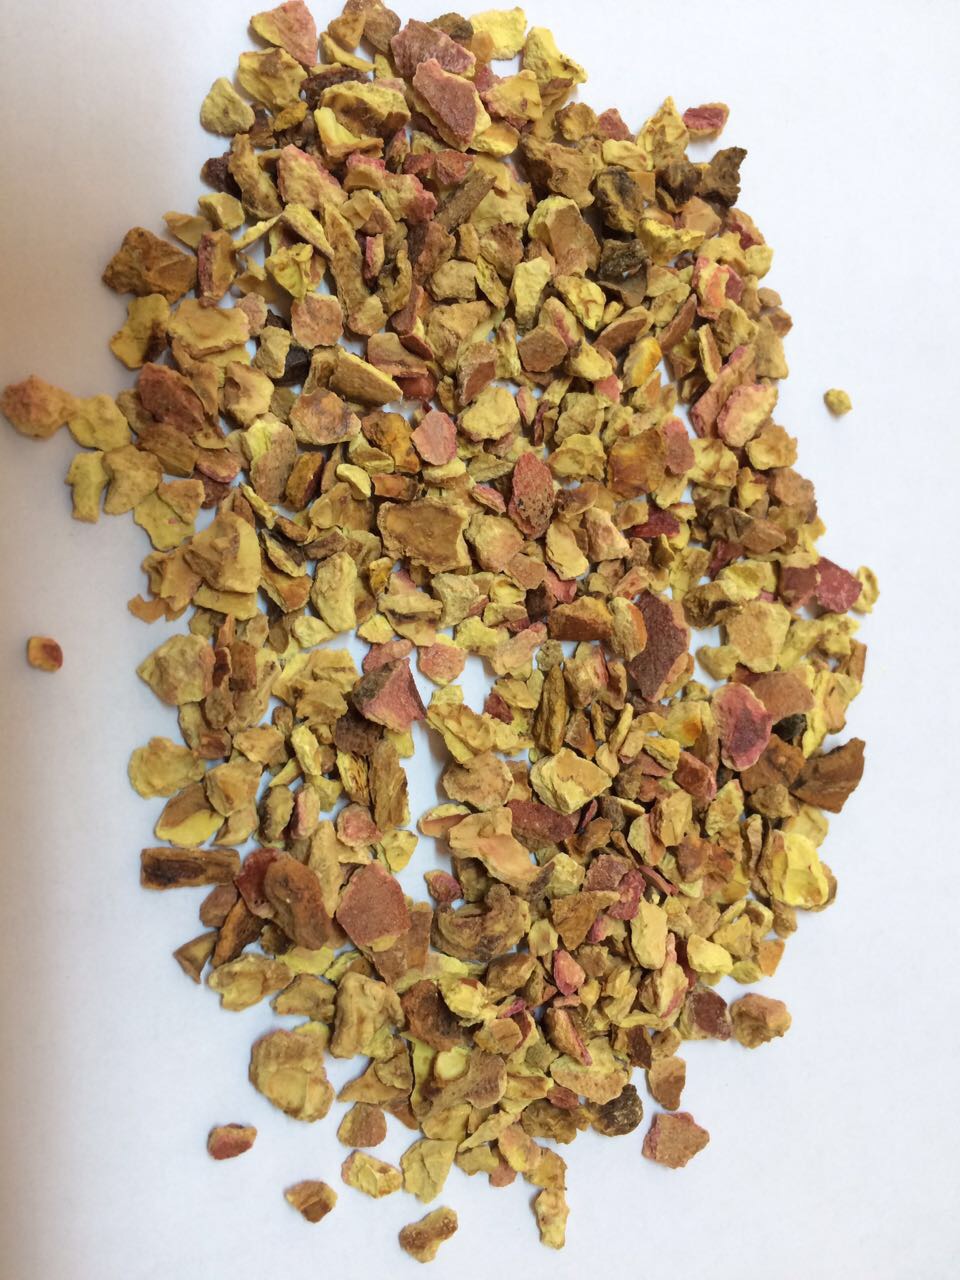 dried pomegranate shell, diced for tea industry